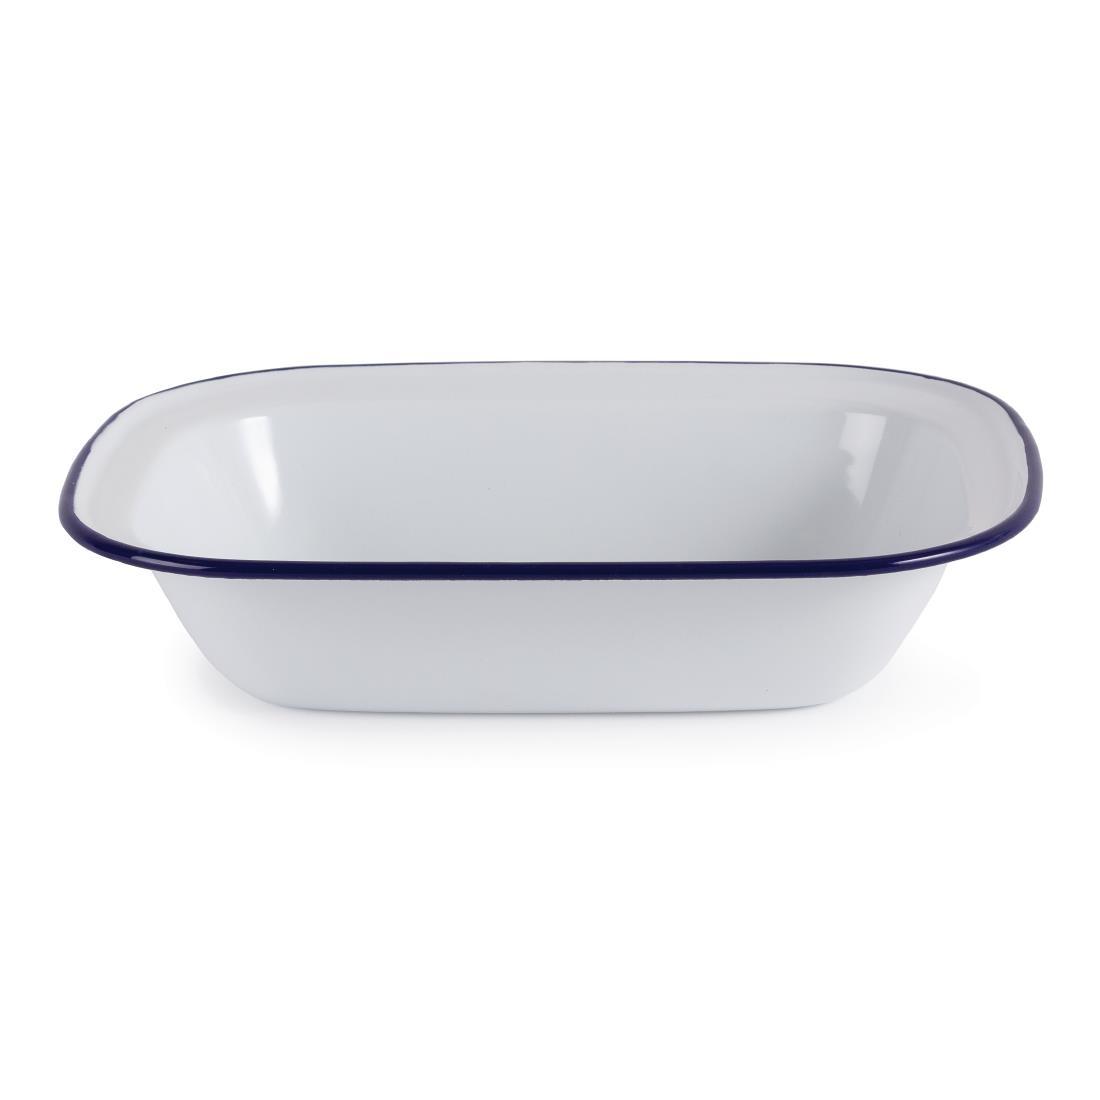 Olympia Enamel Dishes Rectangular 280 x 190mm (Pack of 6) - GM510  - 3